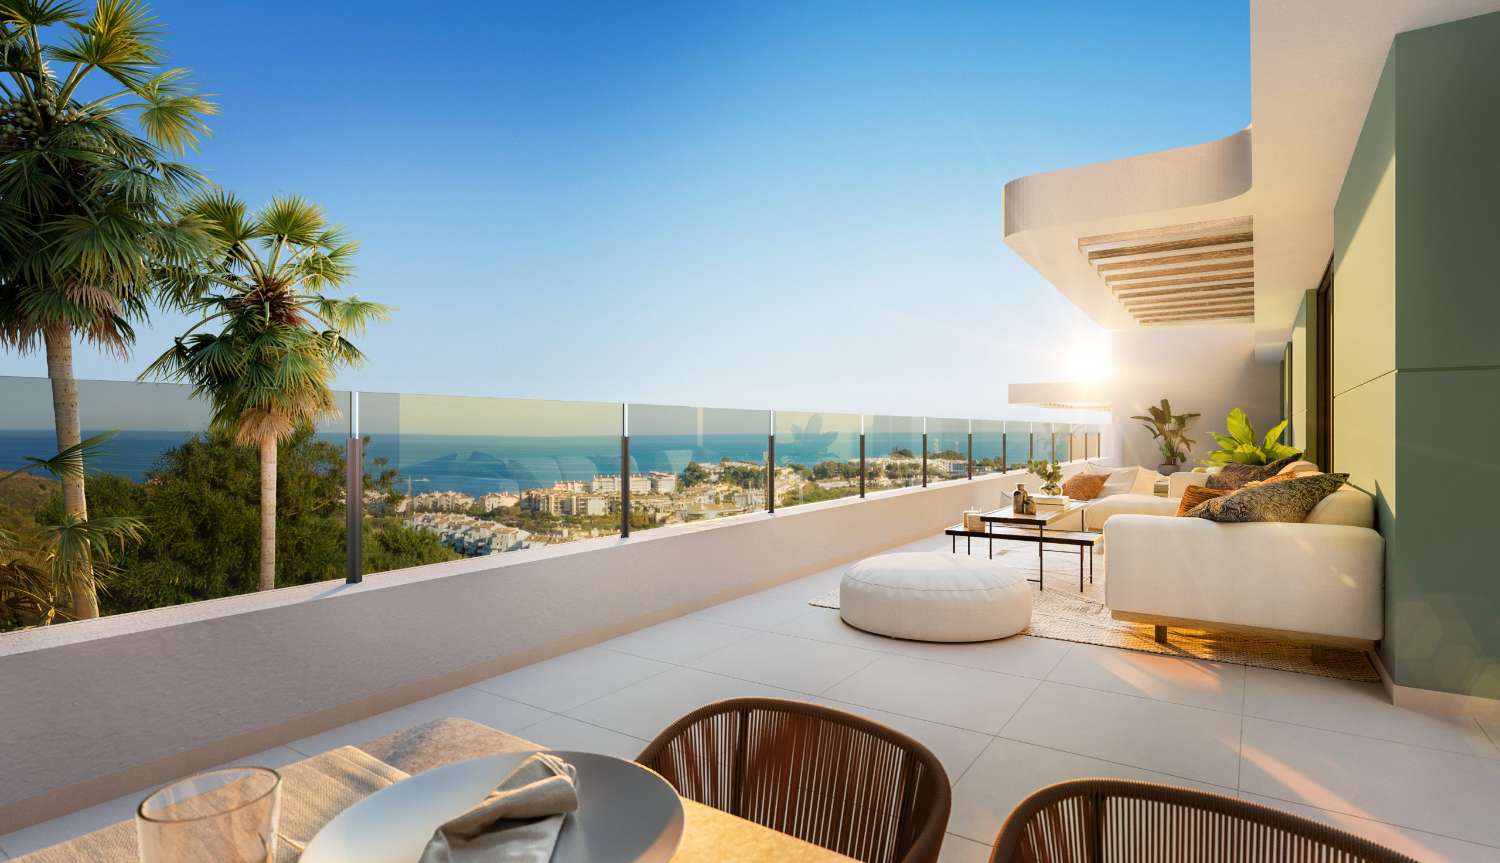 New construction in Mijas large terraces overlooking the Sea